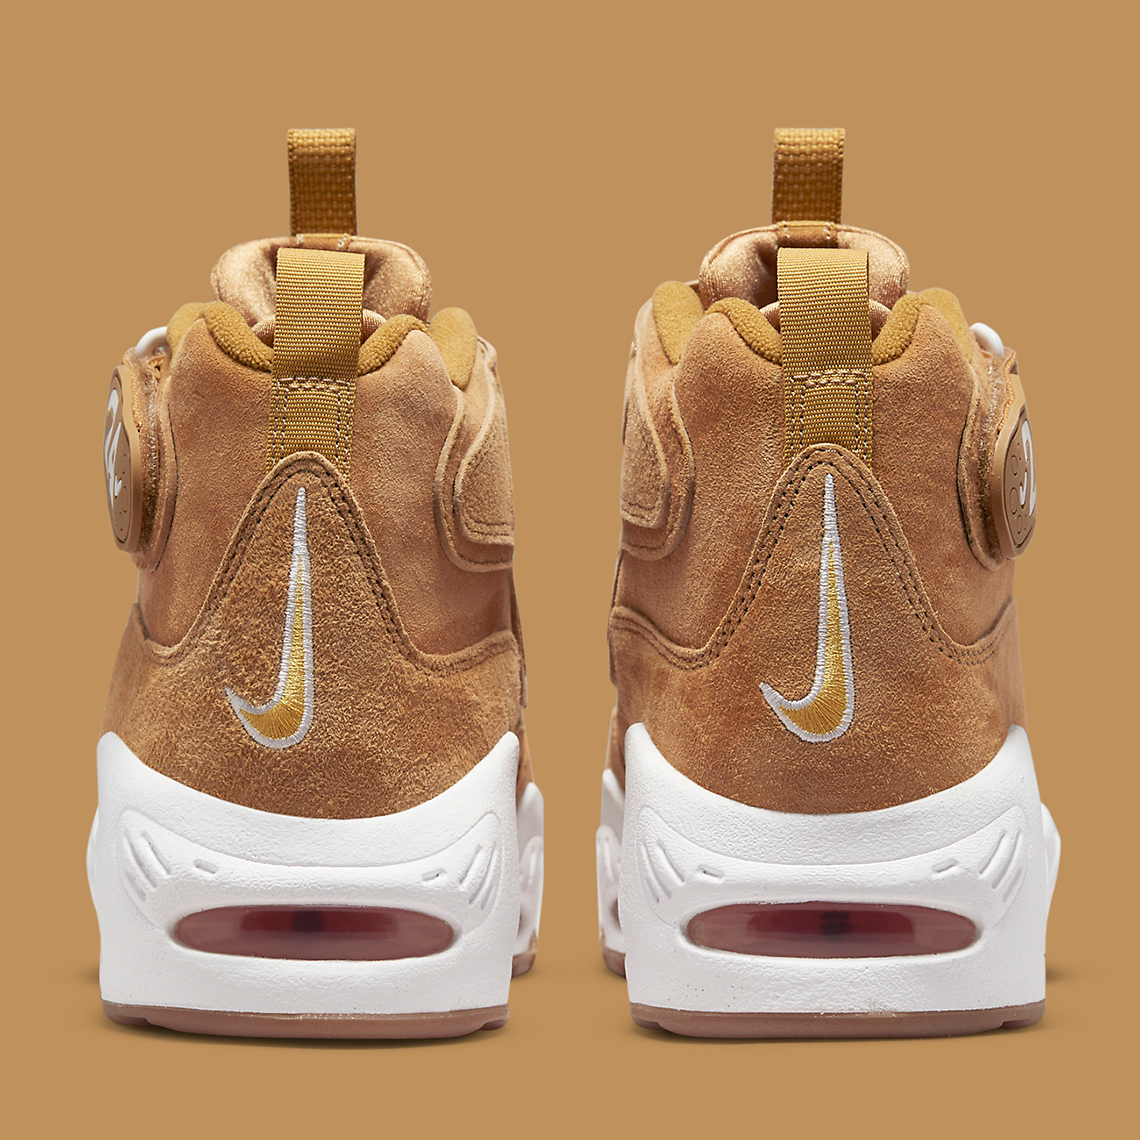 Nike Air Griffey Max 1 Wheat Do6684 700 Release Date 9